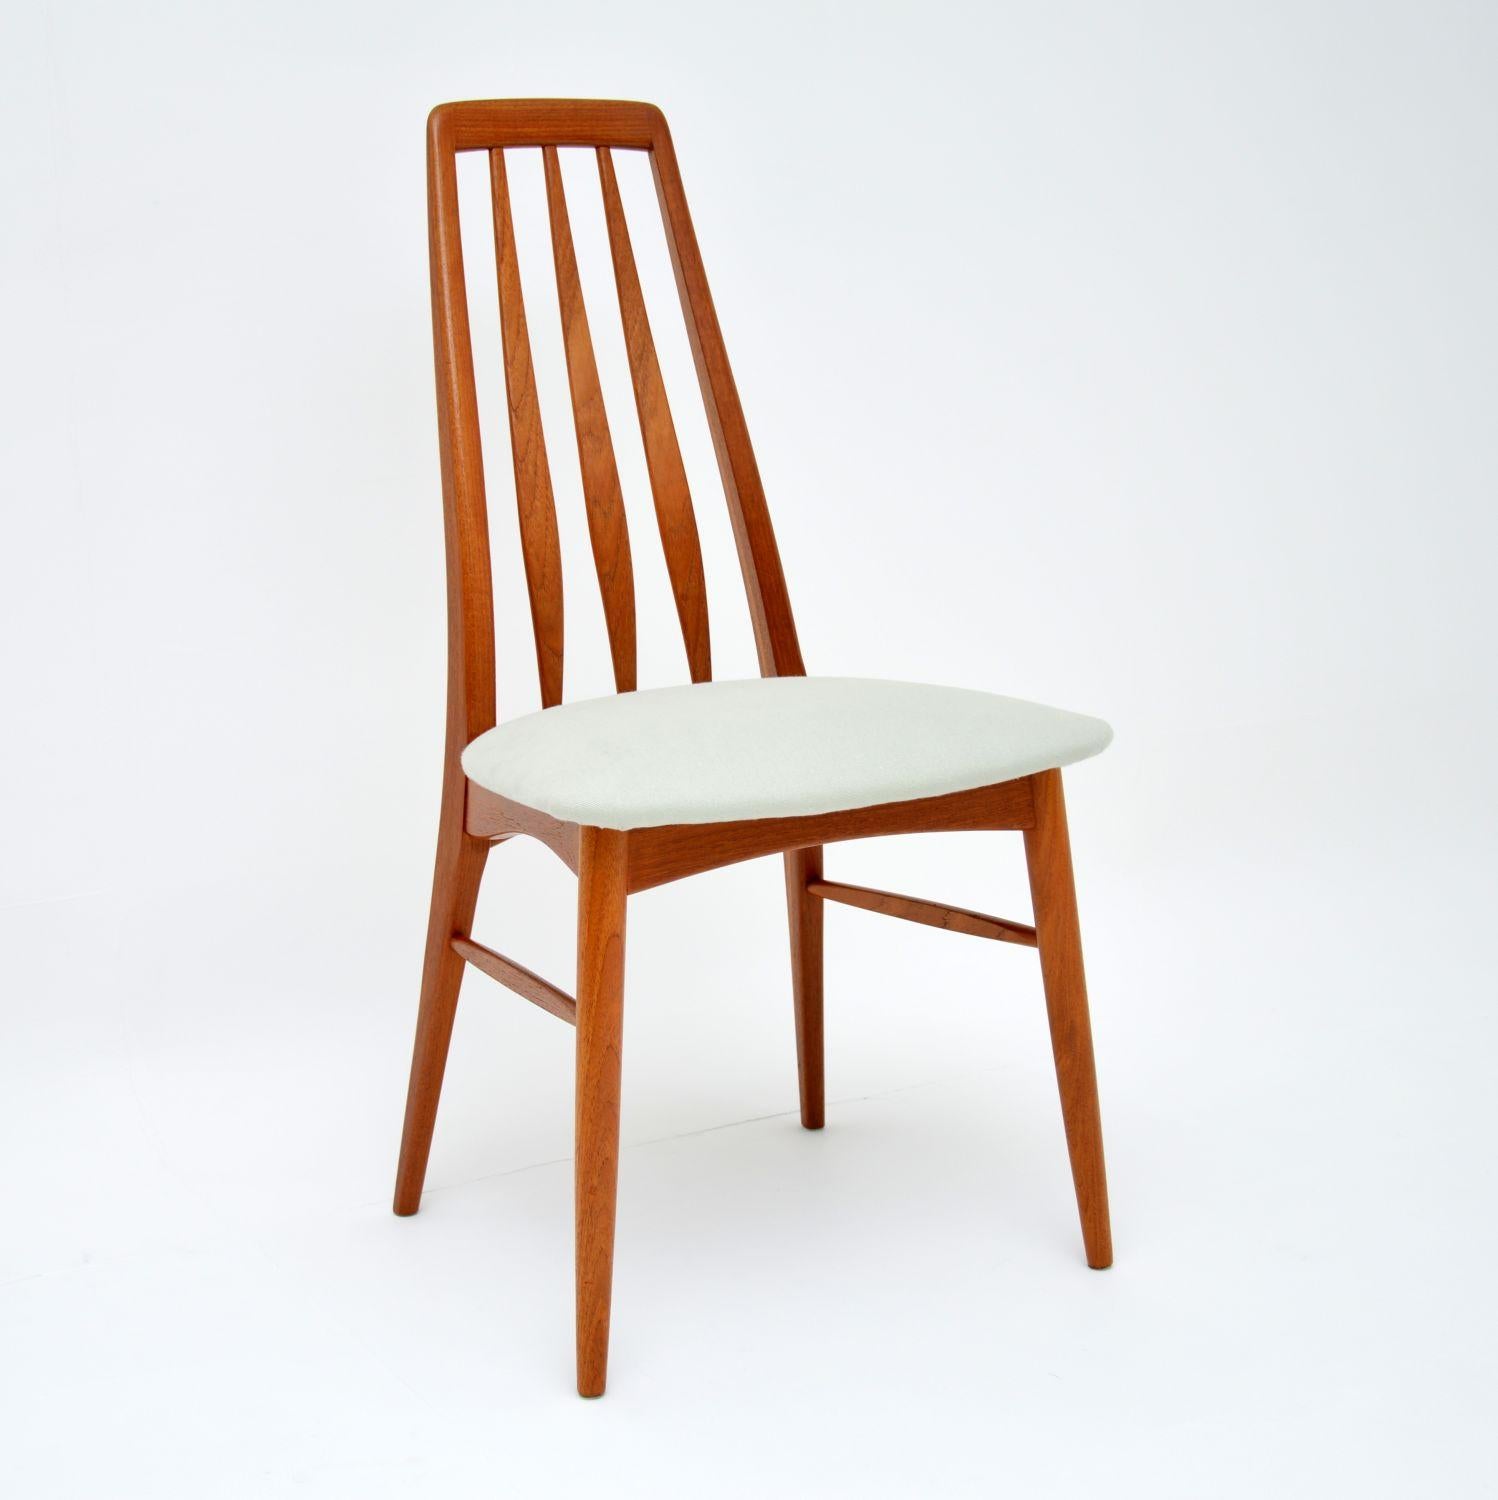 A stunning set of eight Danish vintage dining chairs in teak, dating from the 1960’s. These were designed by Nils Kofoed and made by Koefoeds Hornslet, they are all stamped with the makers mark beneath the seats. They are comfortable and sturdy, we